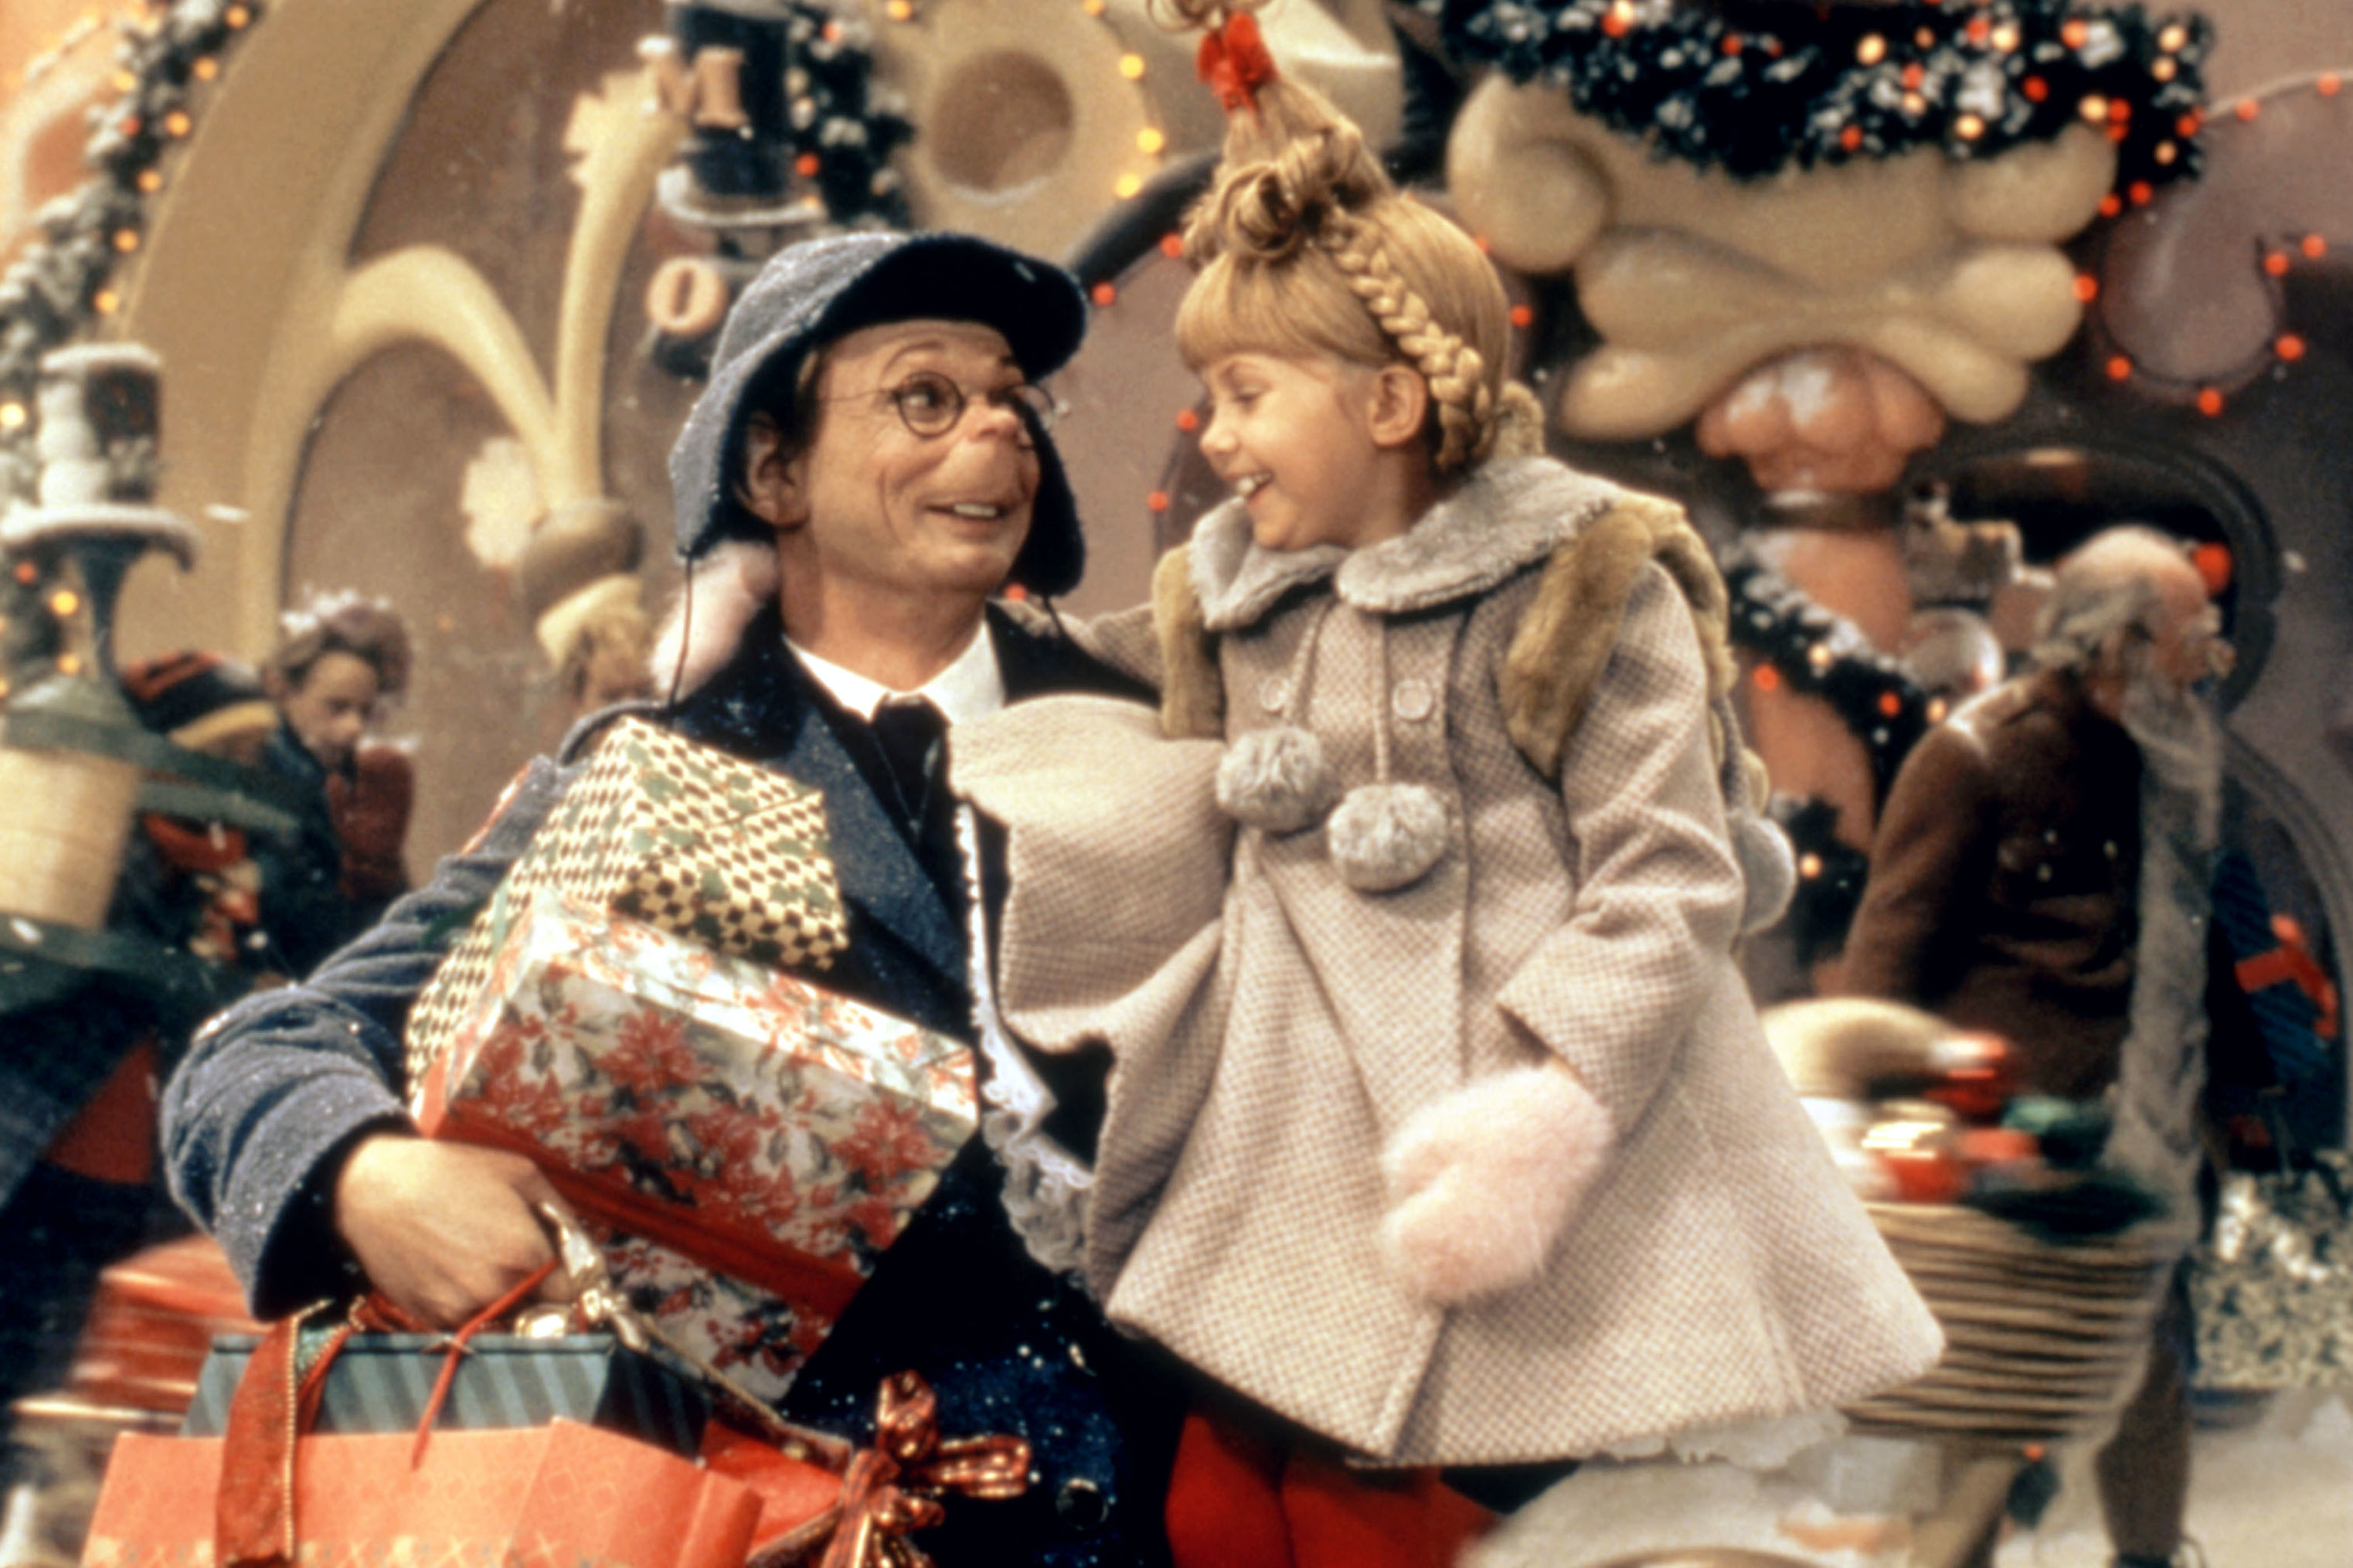 cindy loo-whoo with her dad getting presents